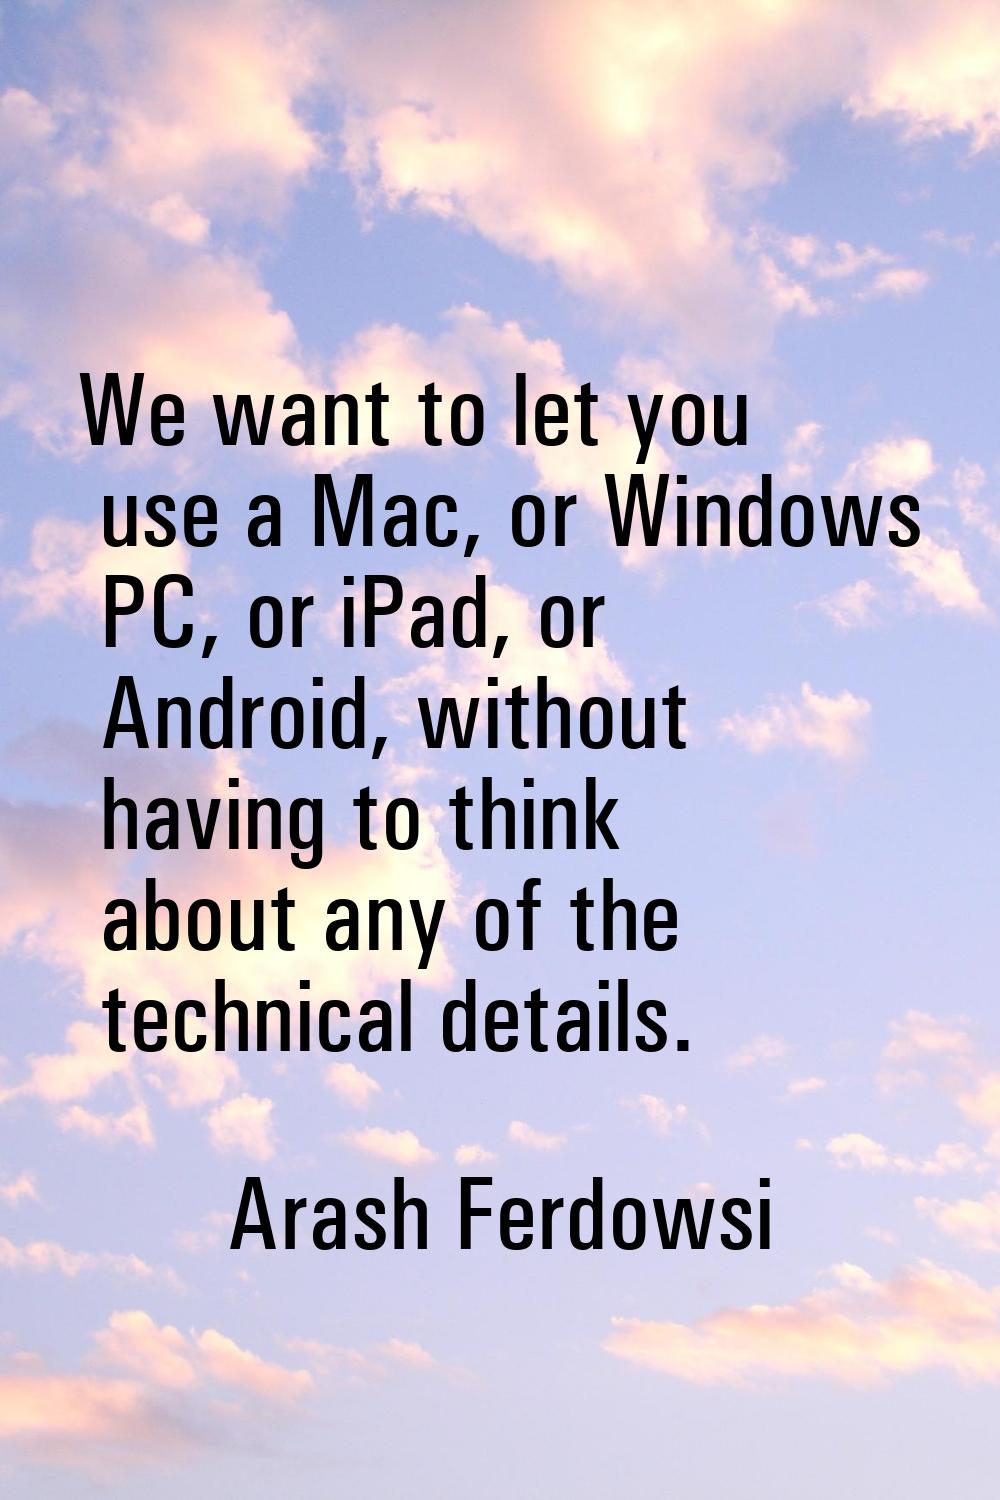 We want to let you use a Mac, or Windows PC, or iPad, or Android, without having to think about any